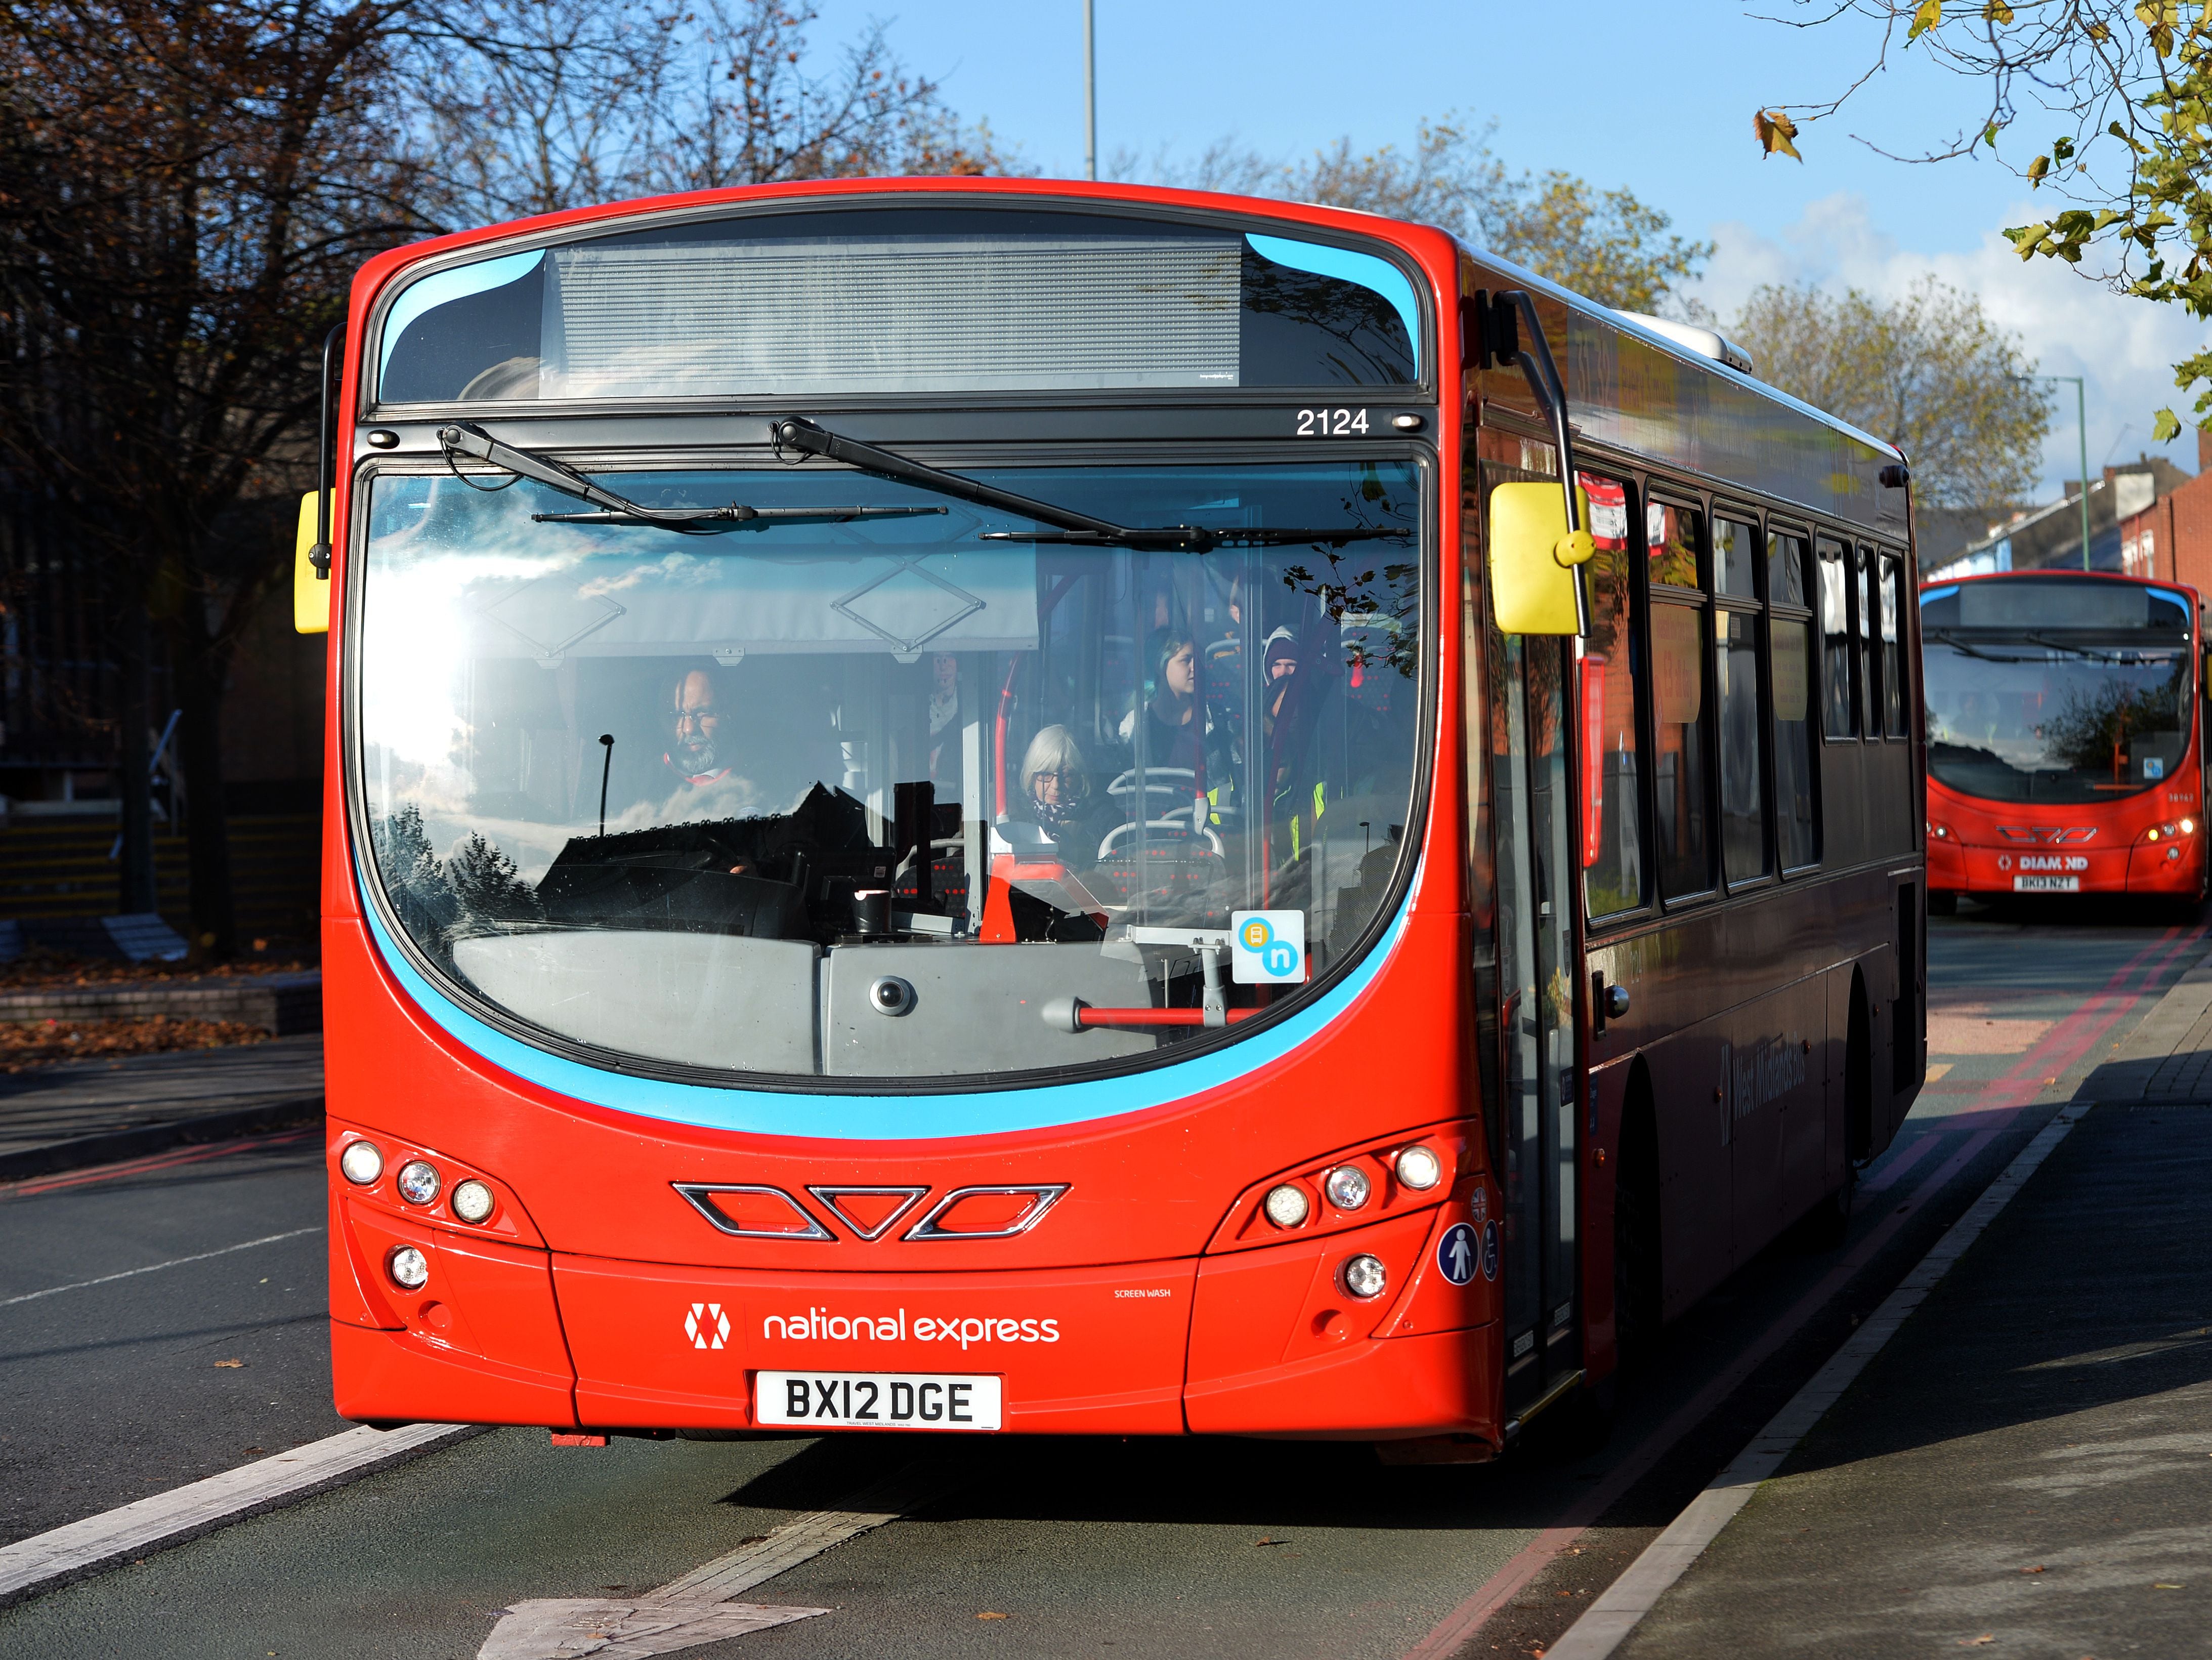 Buses on diversion in the West Bromwich area after incident